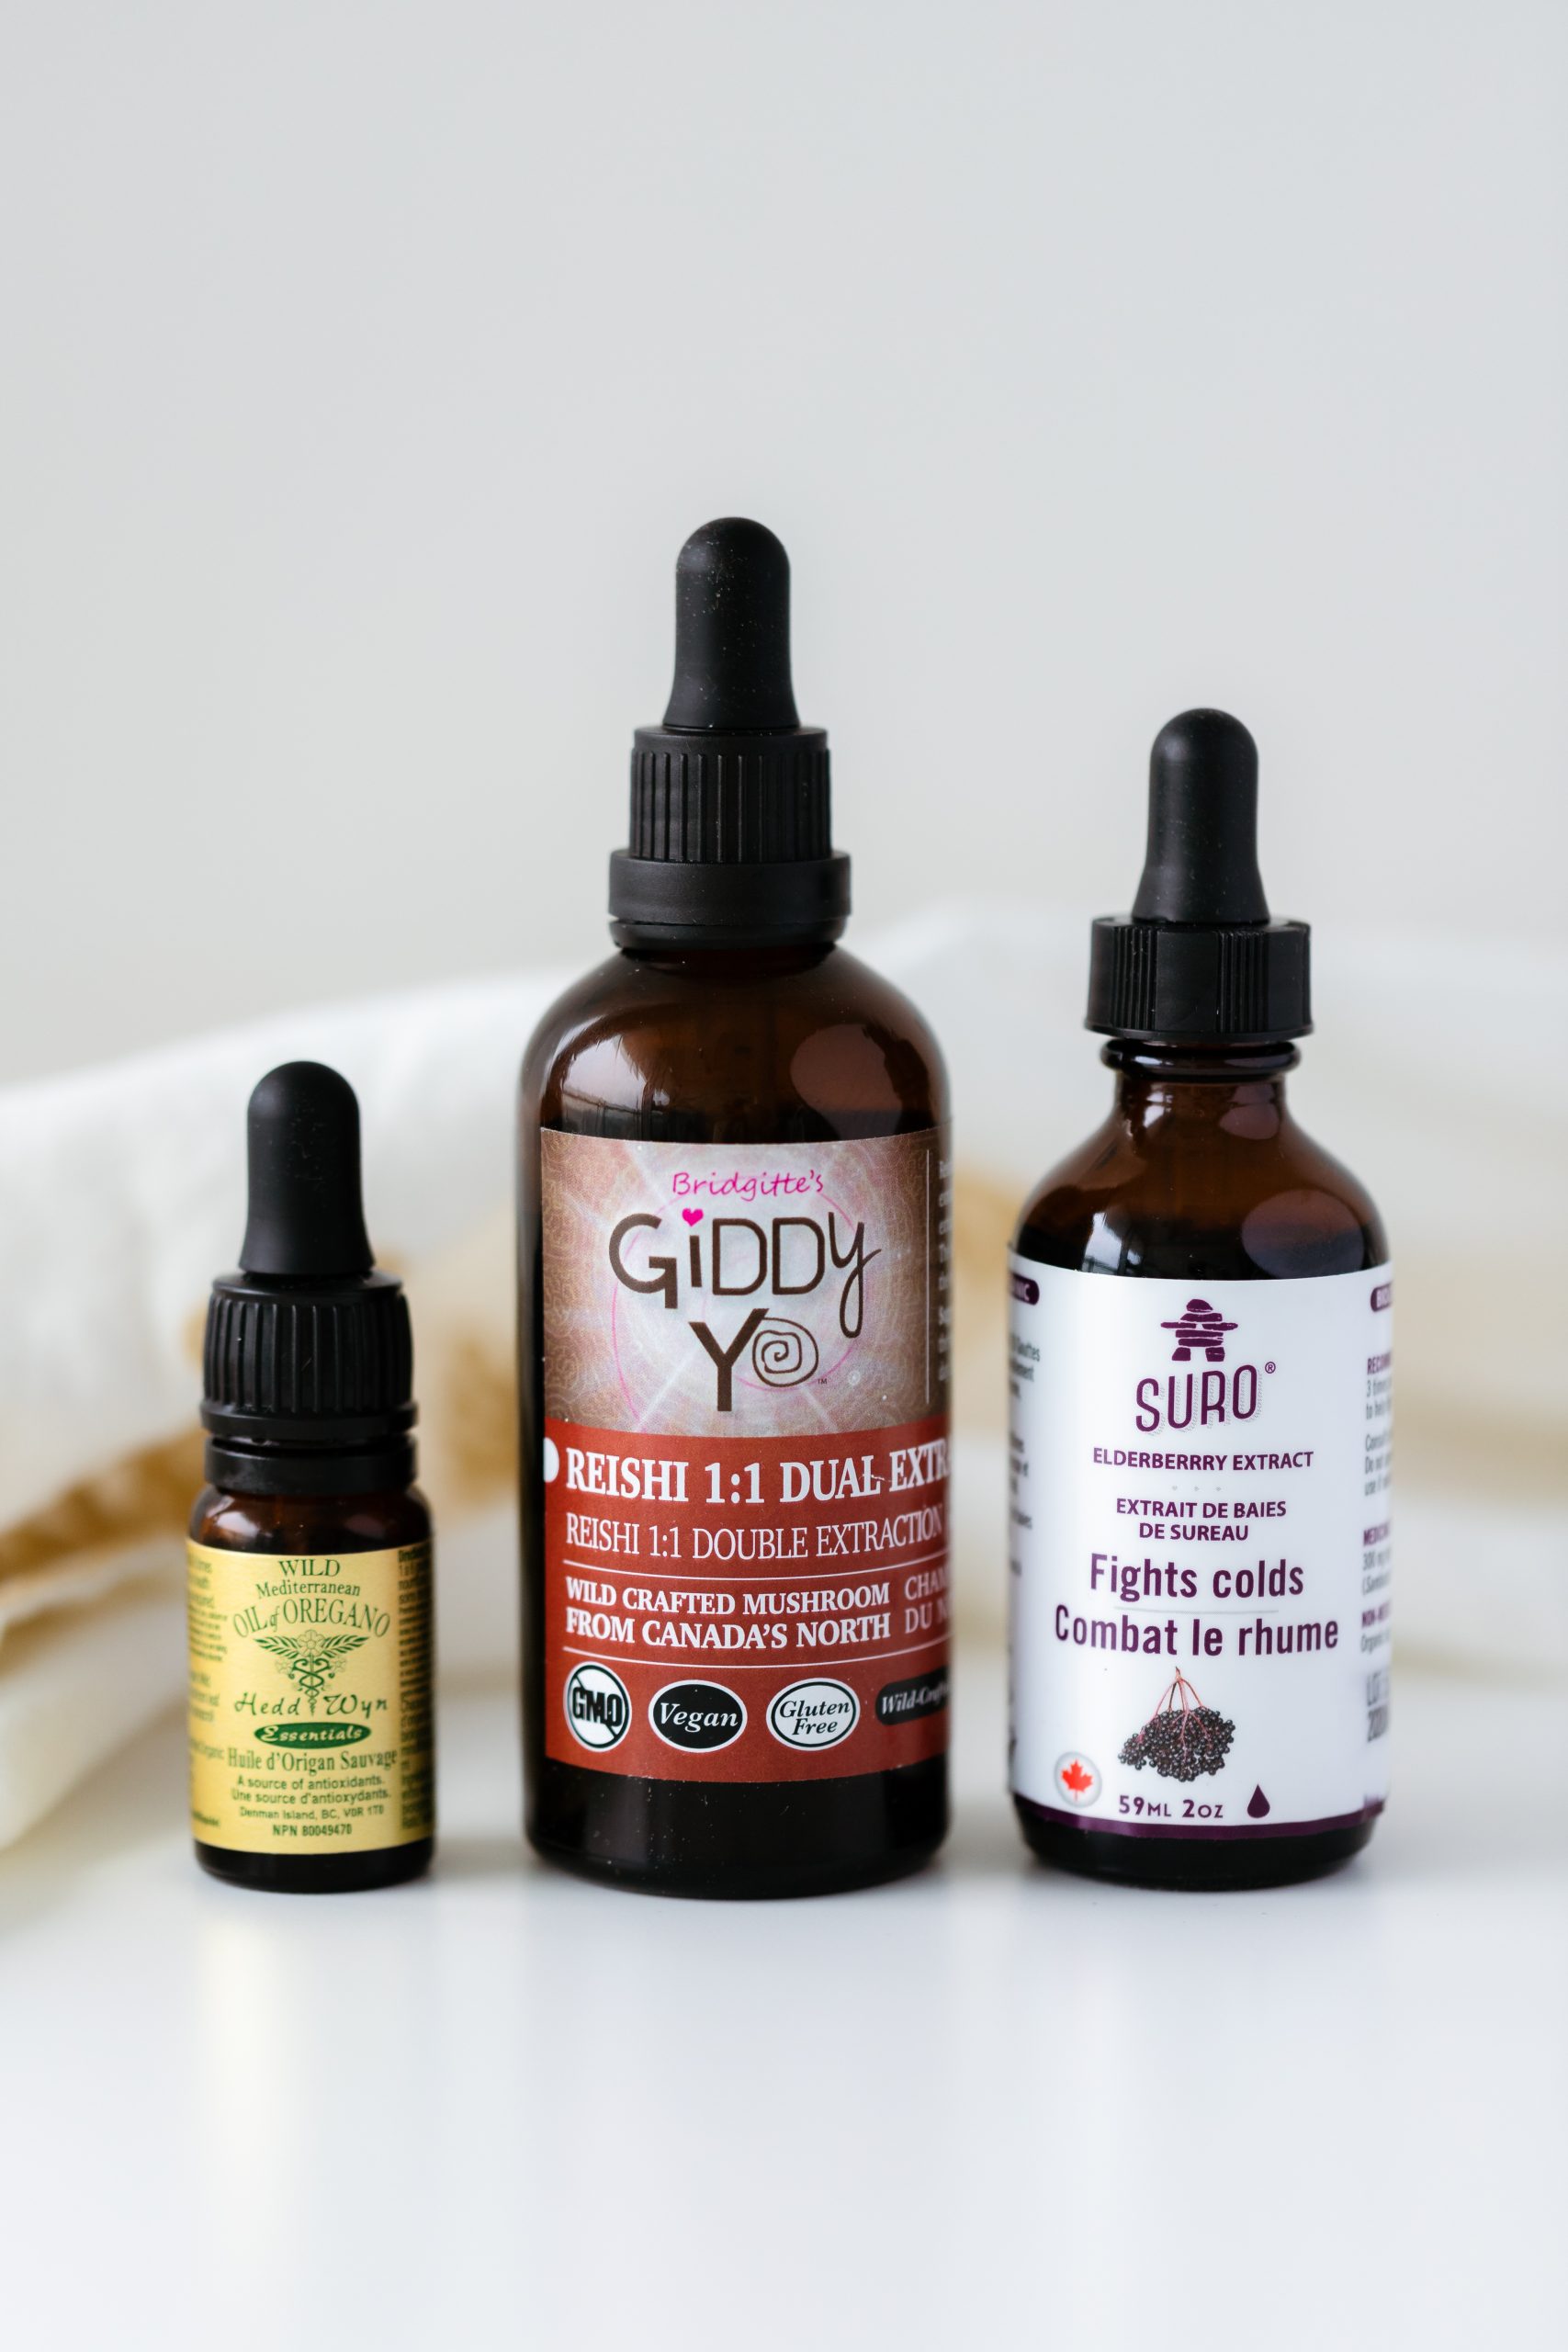 10 immunity-boosting tinctures that can help you fight off viruses during flu season. It's good to boost your immunity, especially now with Covid-19.